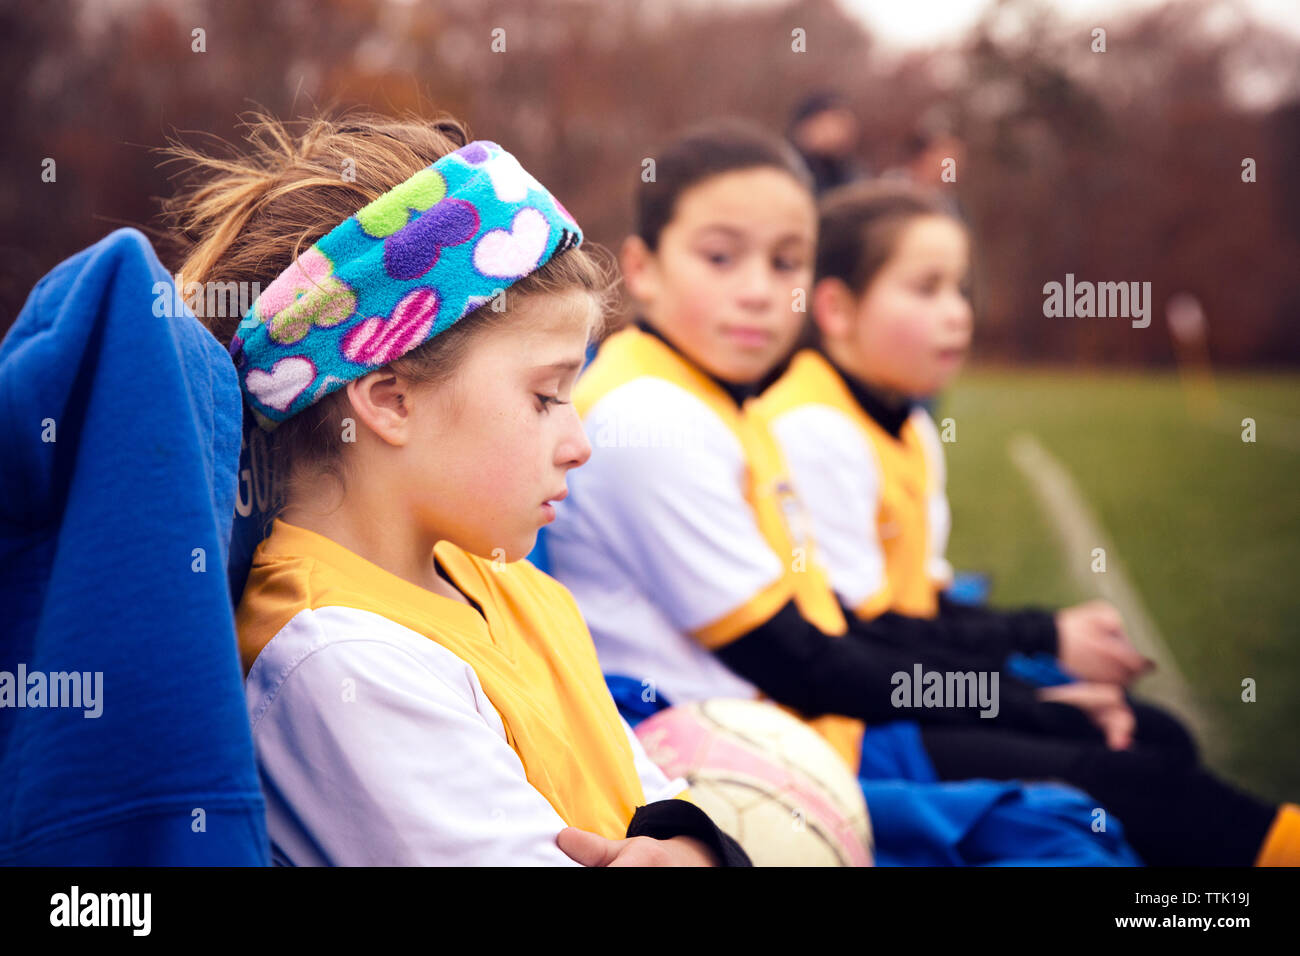 Displeased soccer player sitting with friends at playing field Stock Photo